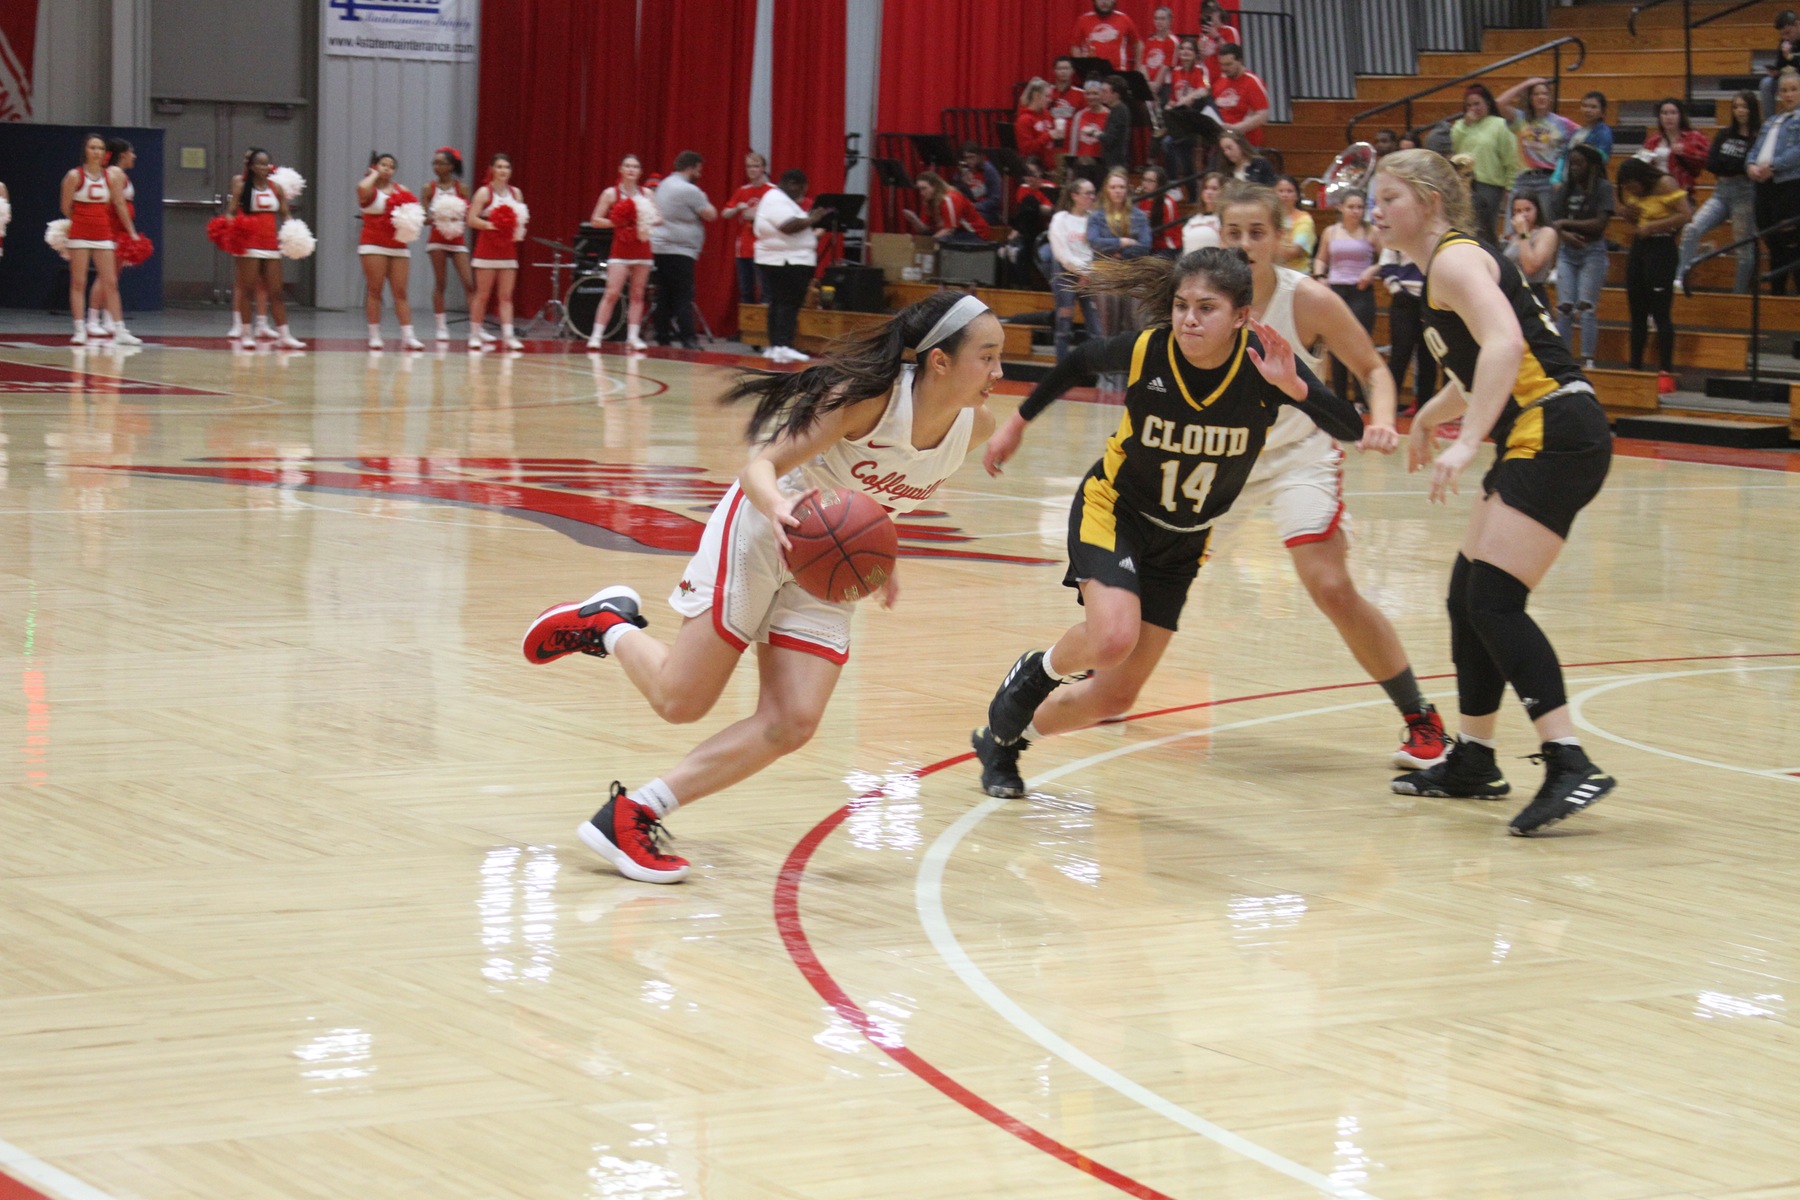 Four Ravens Reach Double Figures in Red Raven Women's Basketball Victory Over Cloud, 73-56